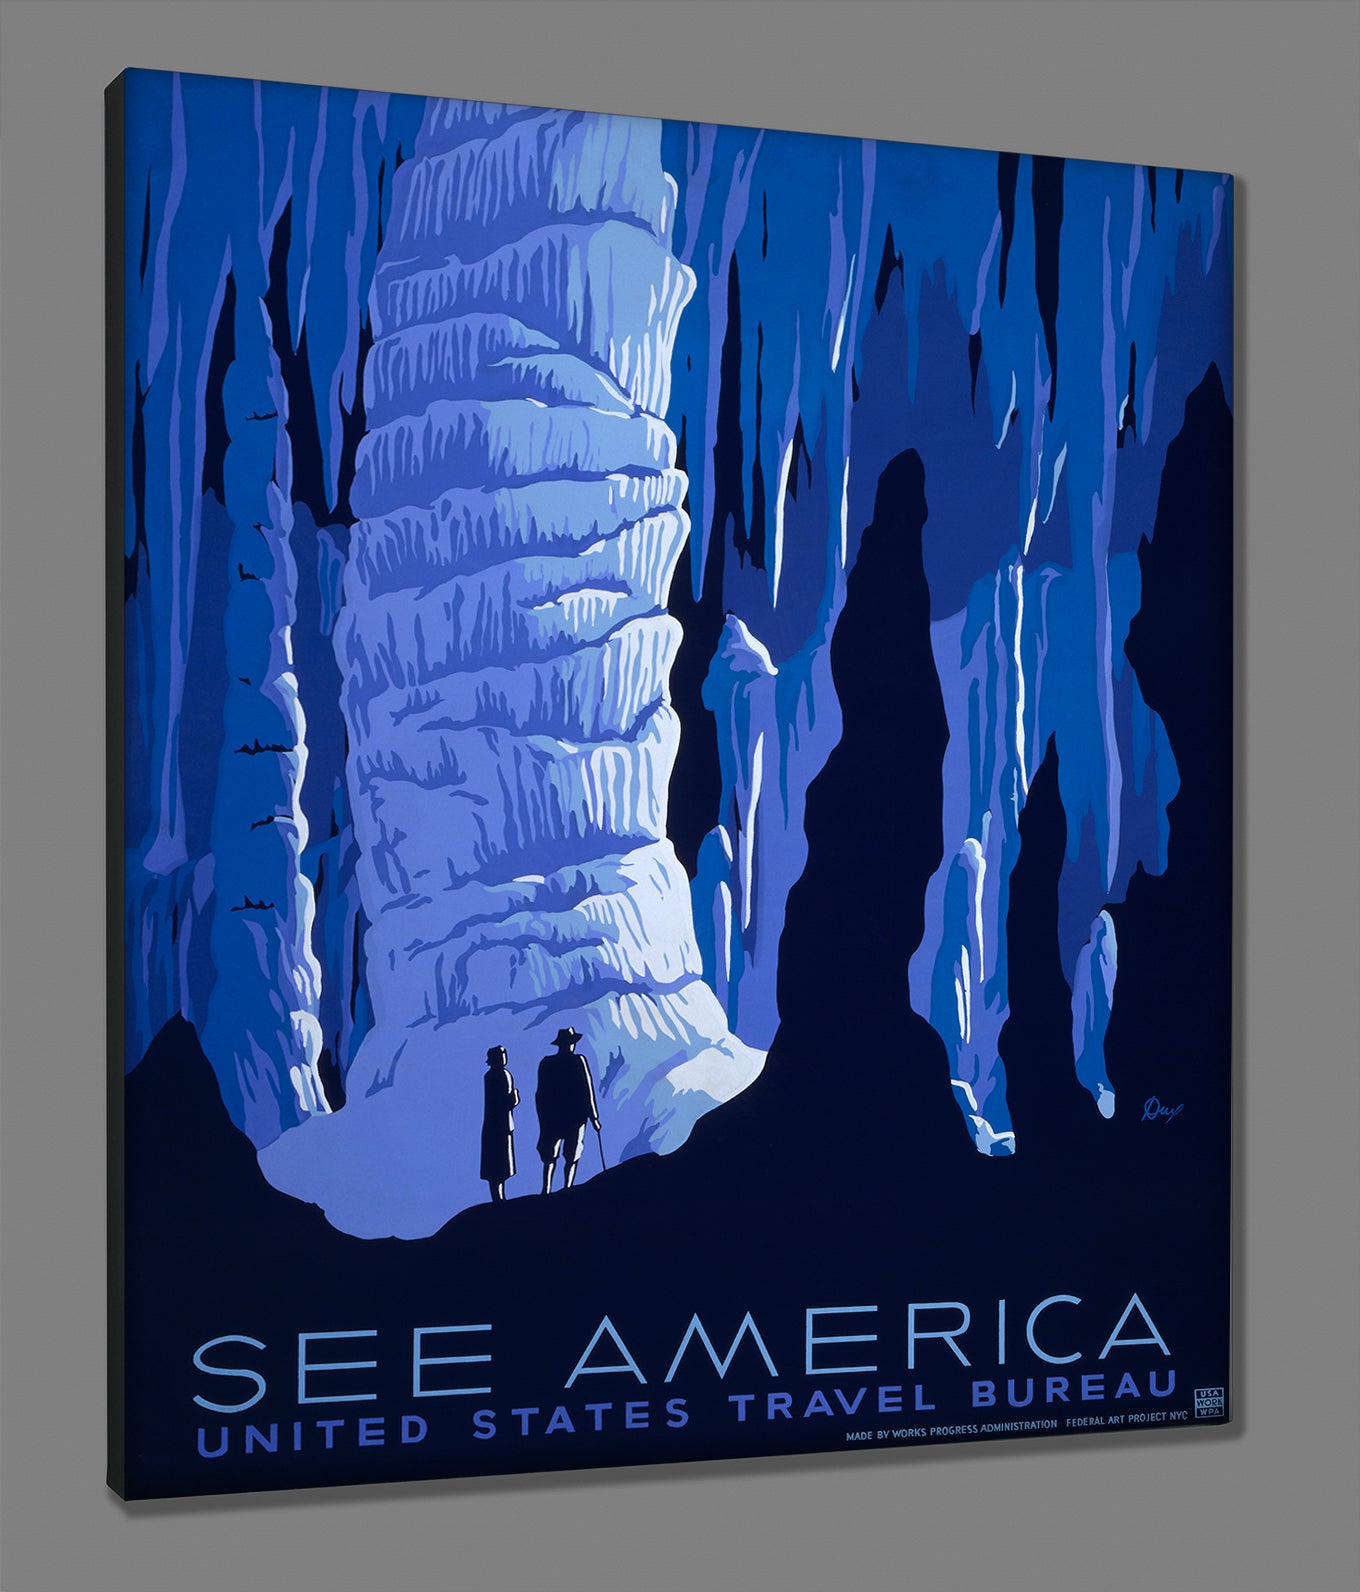 Canvas print mockup of vintage travel poster featuring the slogan See America